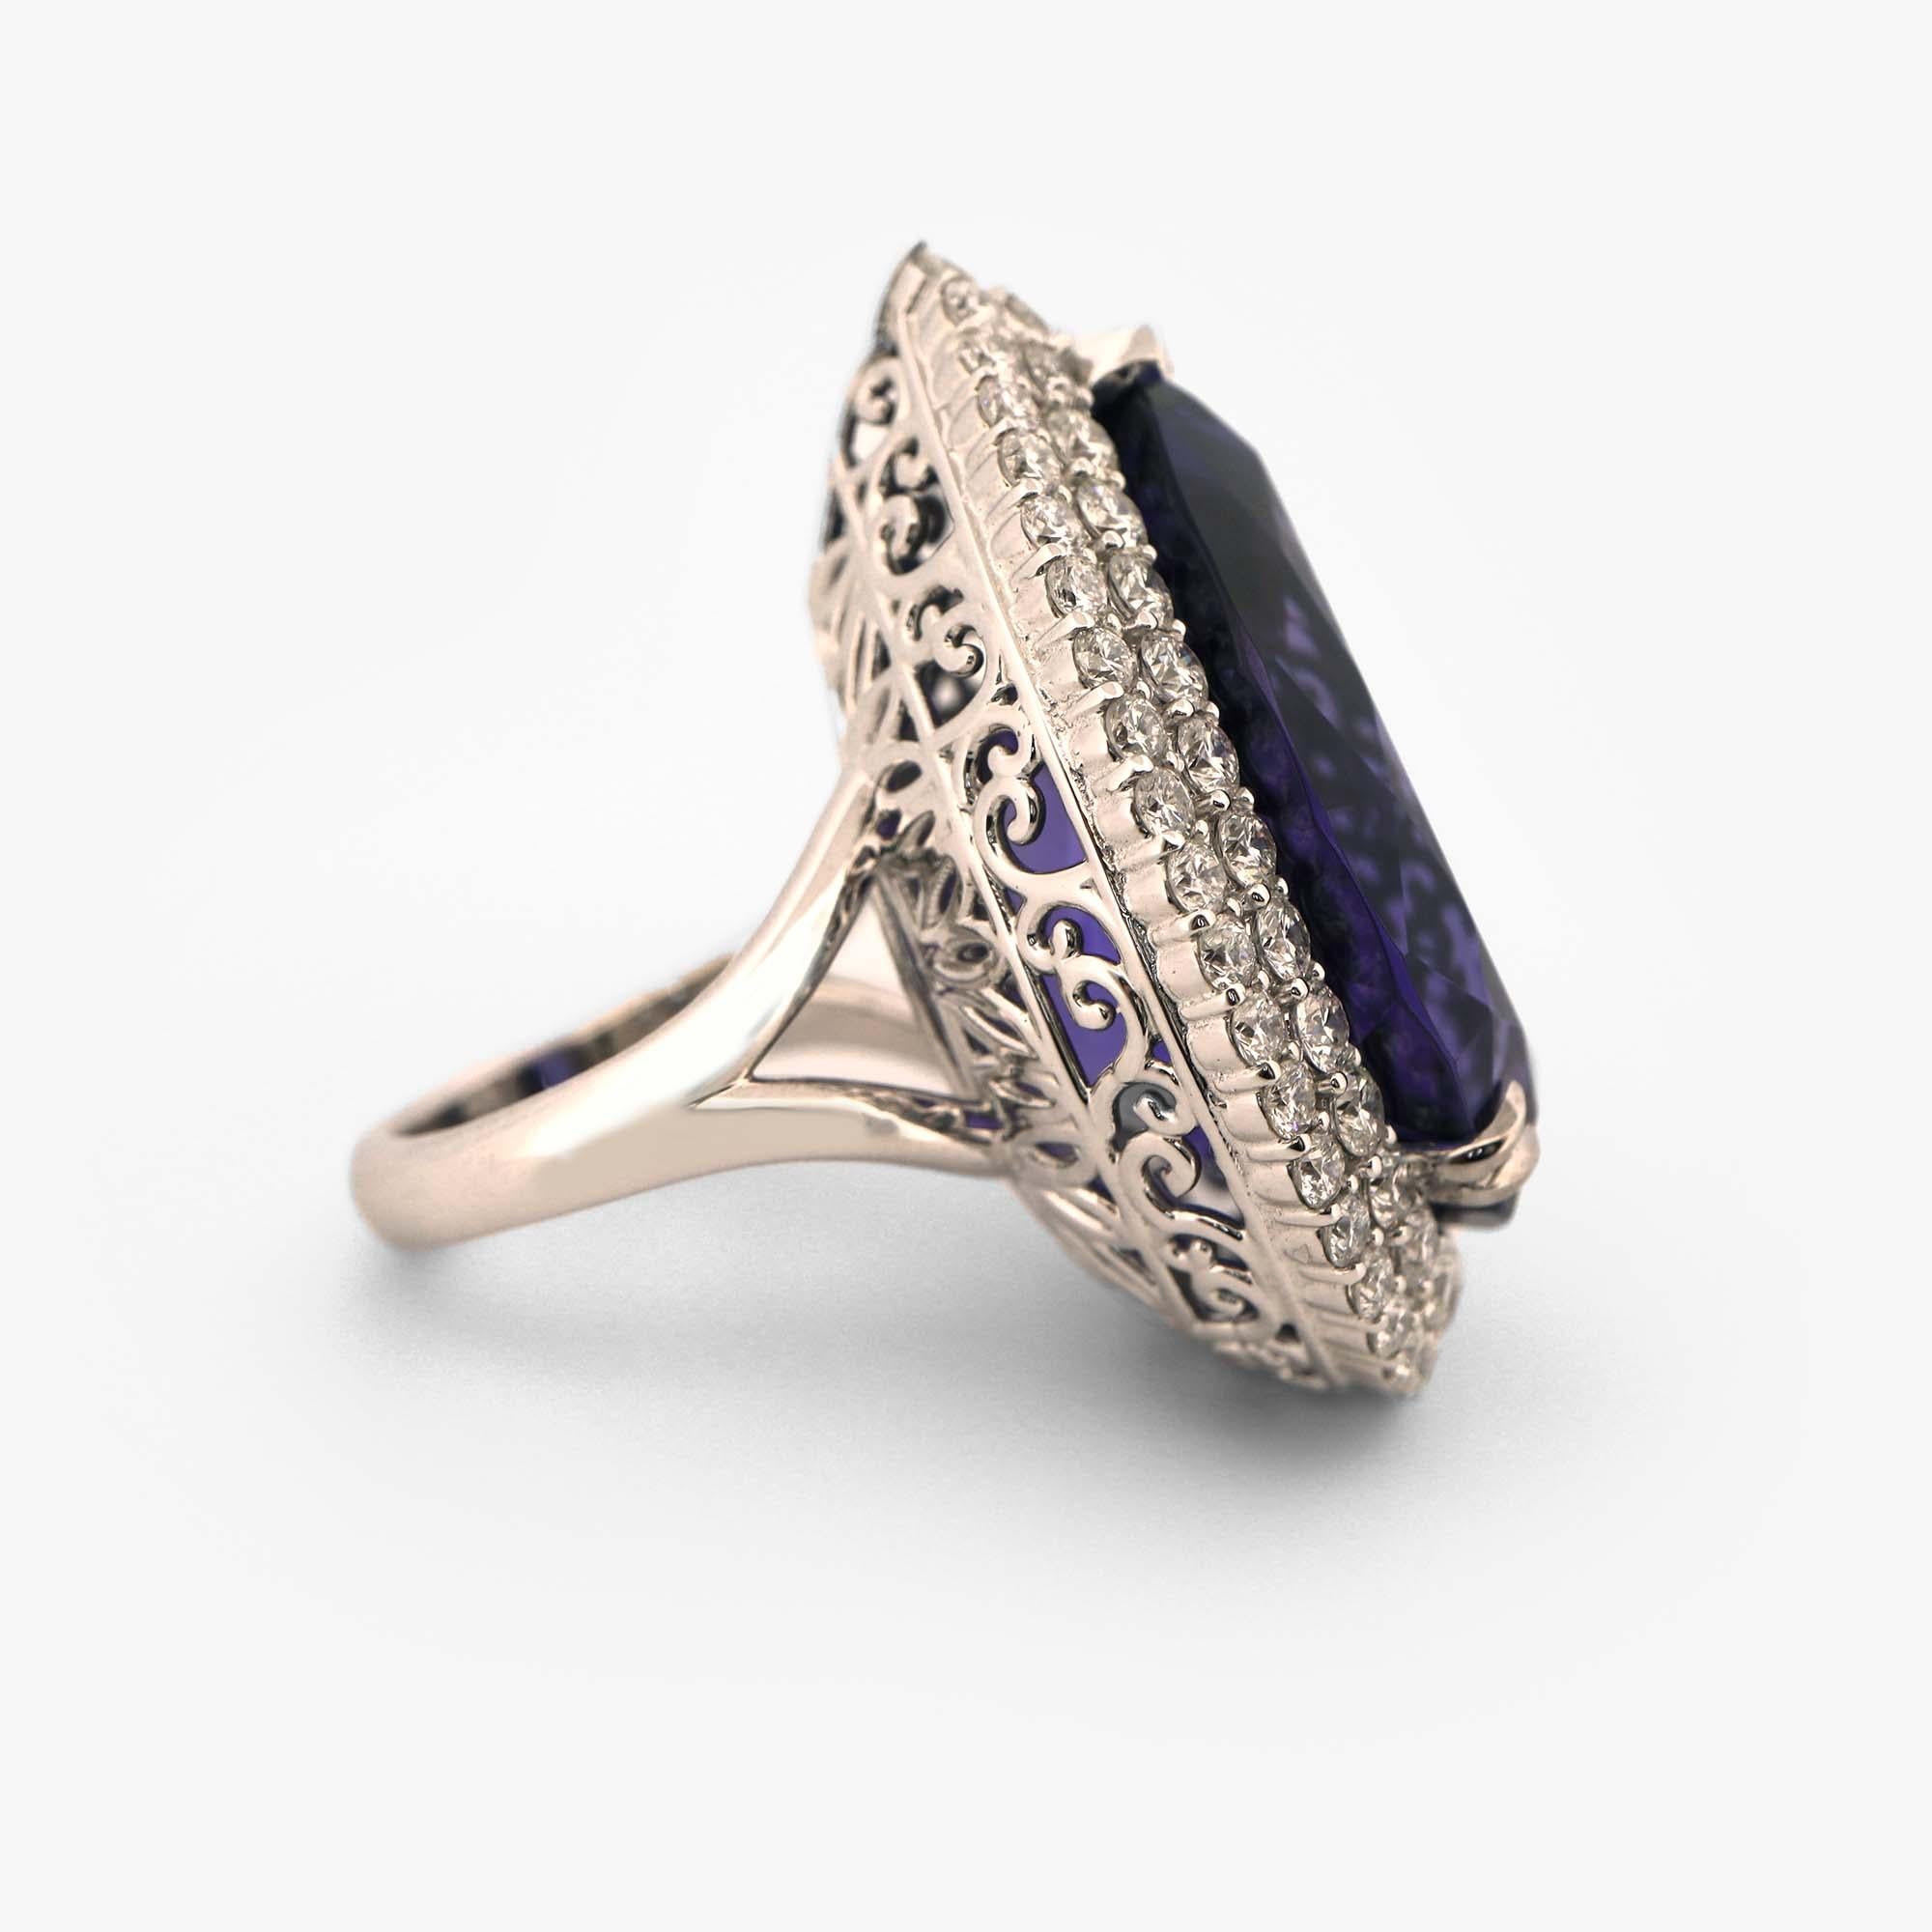 Introducing a breathtaking GIA certified cocktail ring featuring a magnificent 39.6 carat tanzanite center stone surrounded by 3.27 carats of sparkling diamonds.

Crafted with exceptional attention to detail, this exquisite ring showcases a stunning